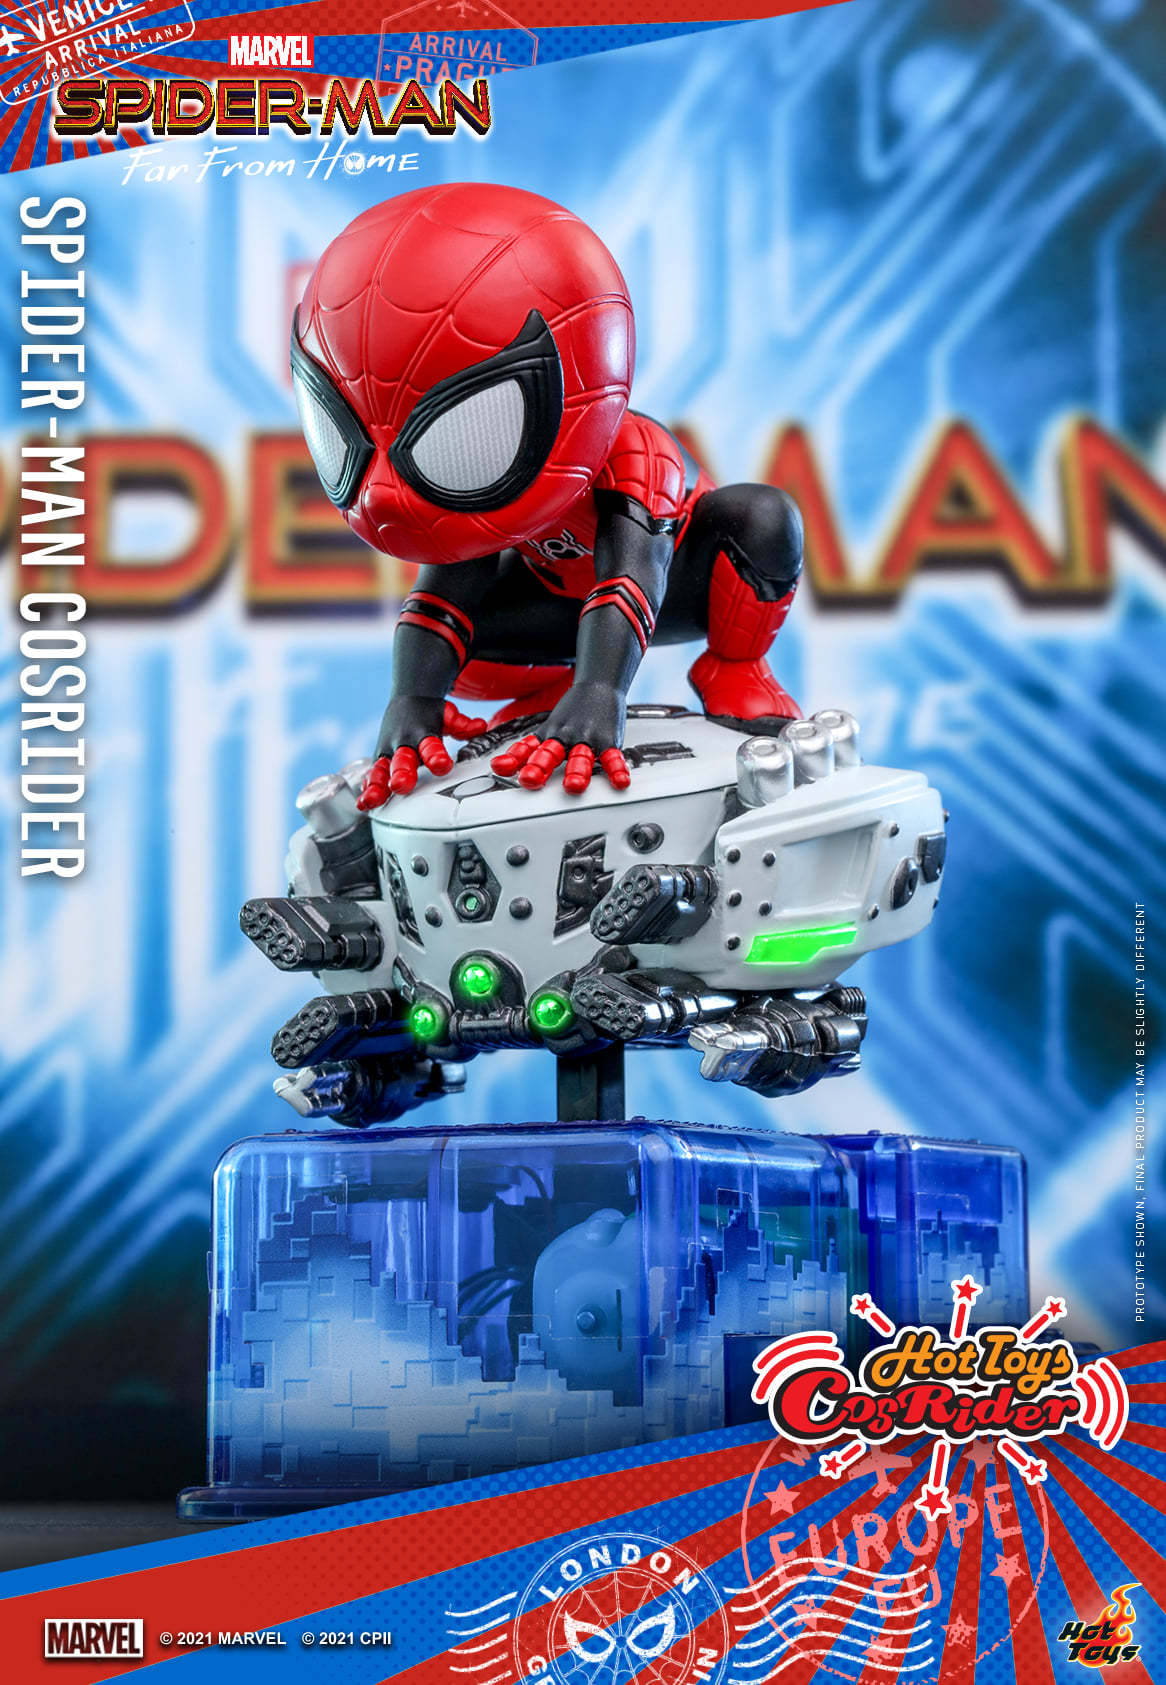 Hot Toys Spider-Man Far From Home CosRider